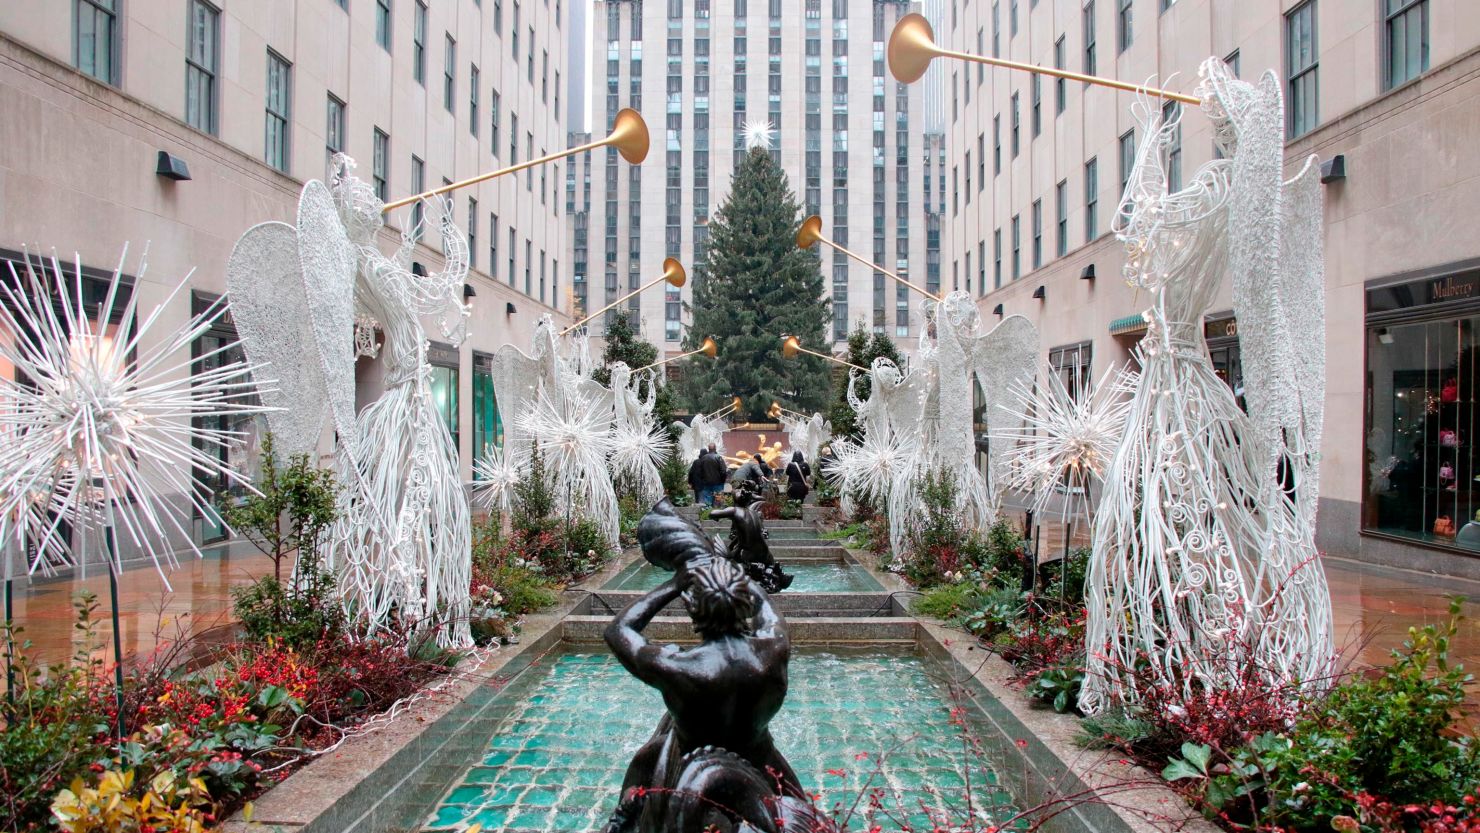 Christmas Tree Goes Up In Rockefeller Center ** STORY AVAILABLE, CONTACT SUPPLIER**  (Cover Images via AP Images)